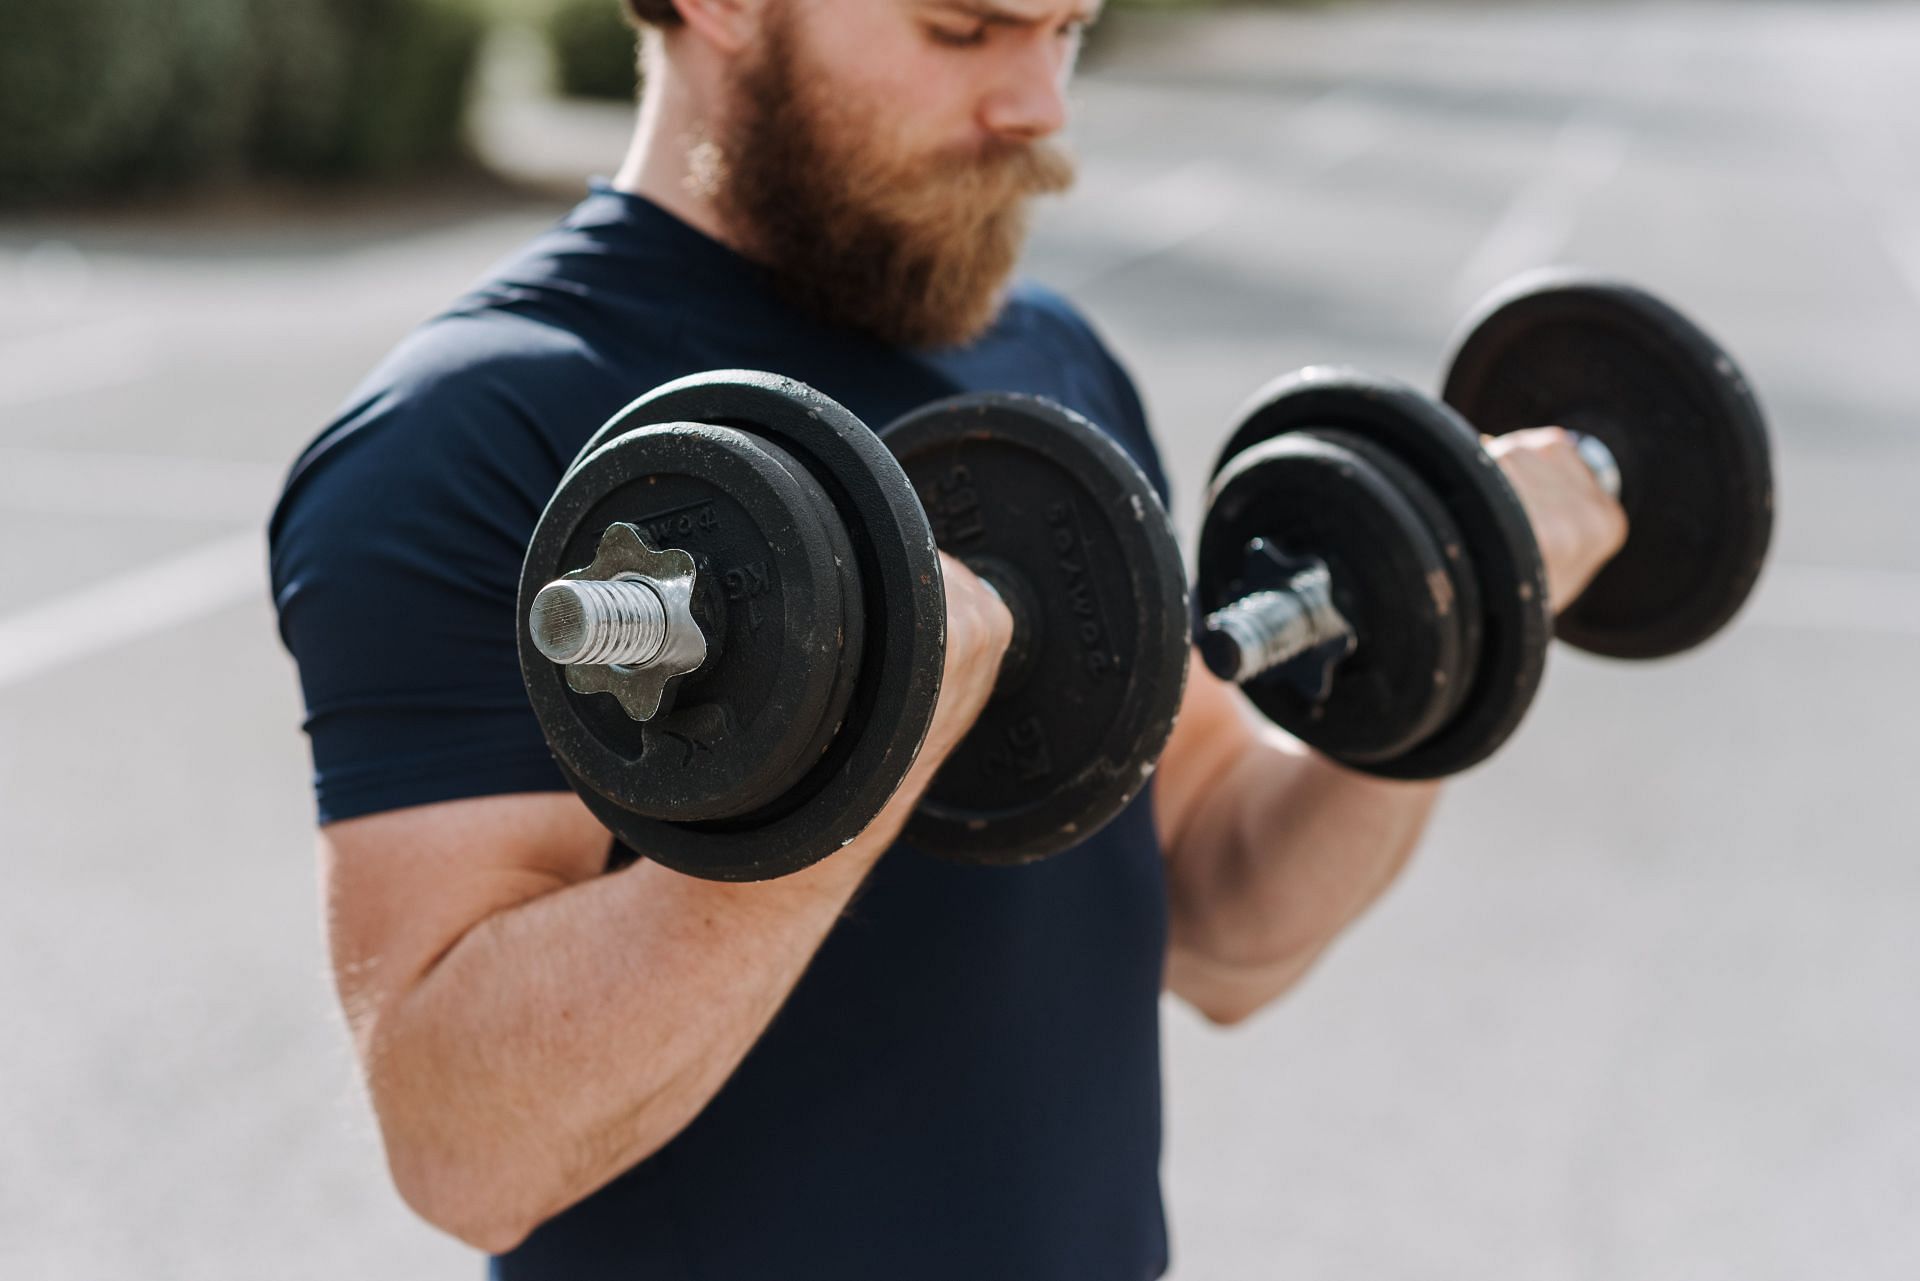 The dumbbell shoulder press can be performed while sitting or standing. (Image via Pexels/ Anete Lusina)